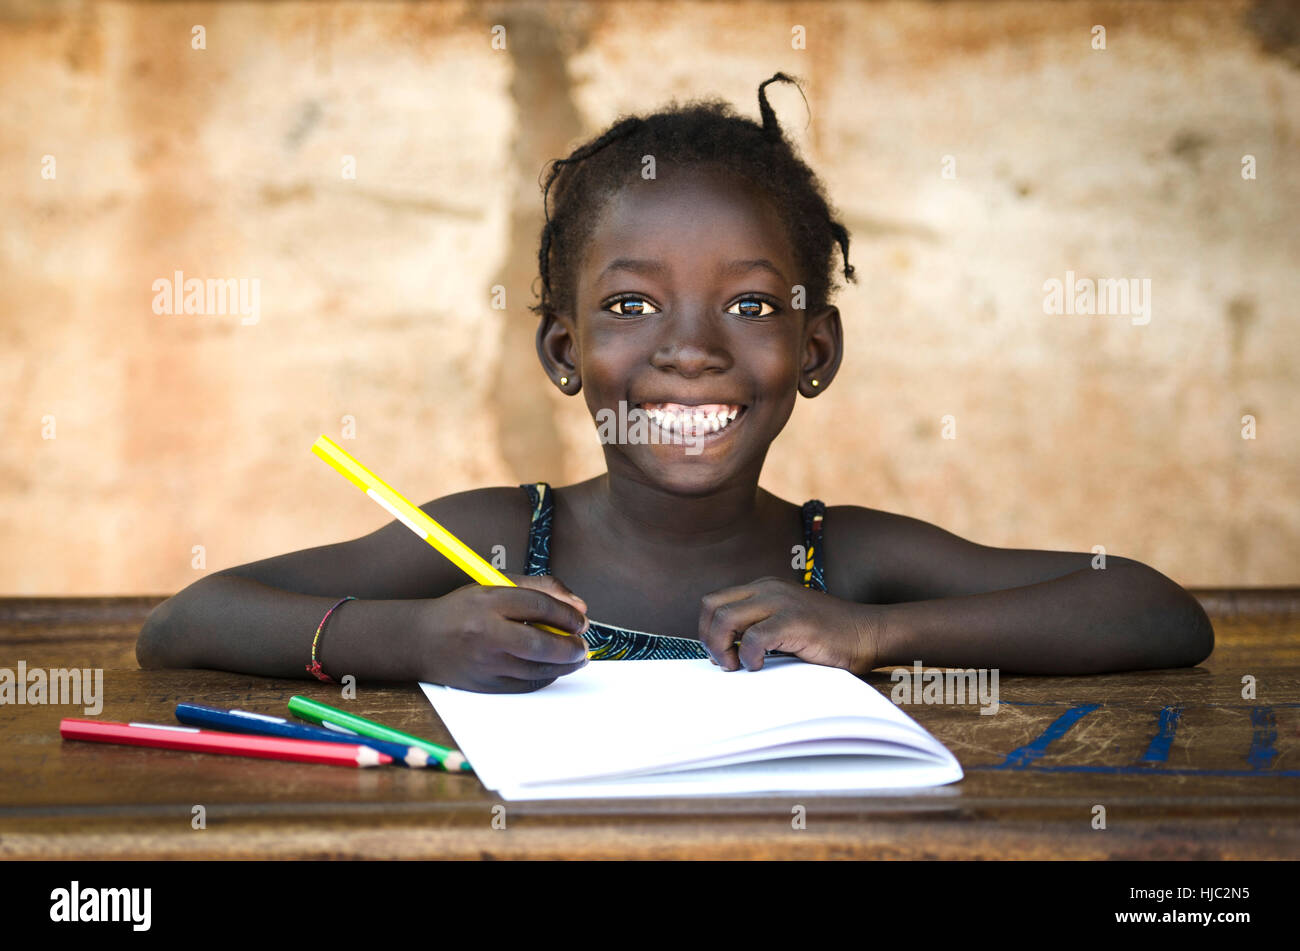 Education Symbol: Big Toothy Smile on African School Girl Stock Photo